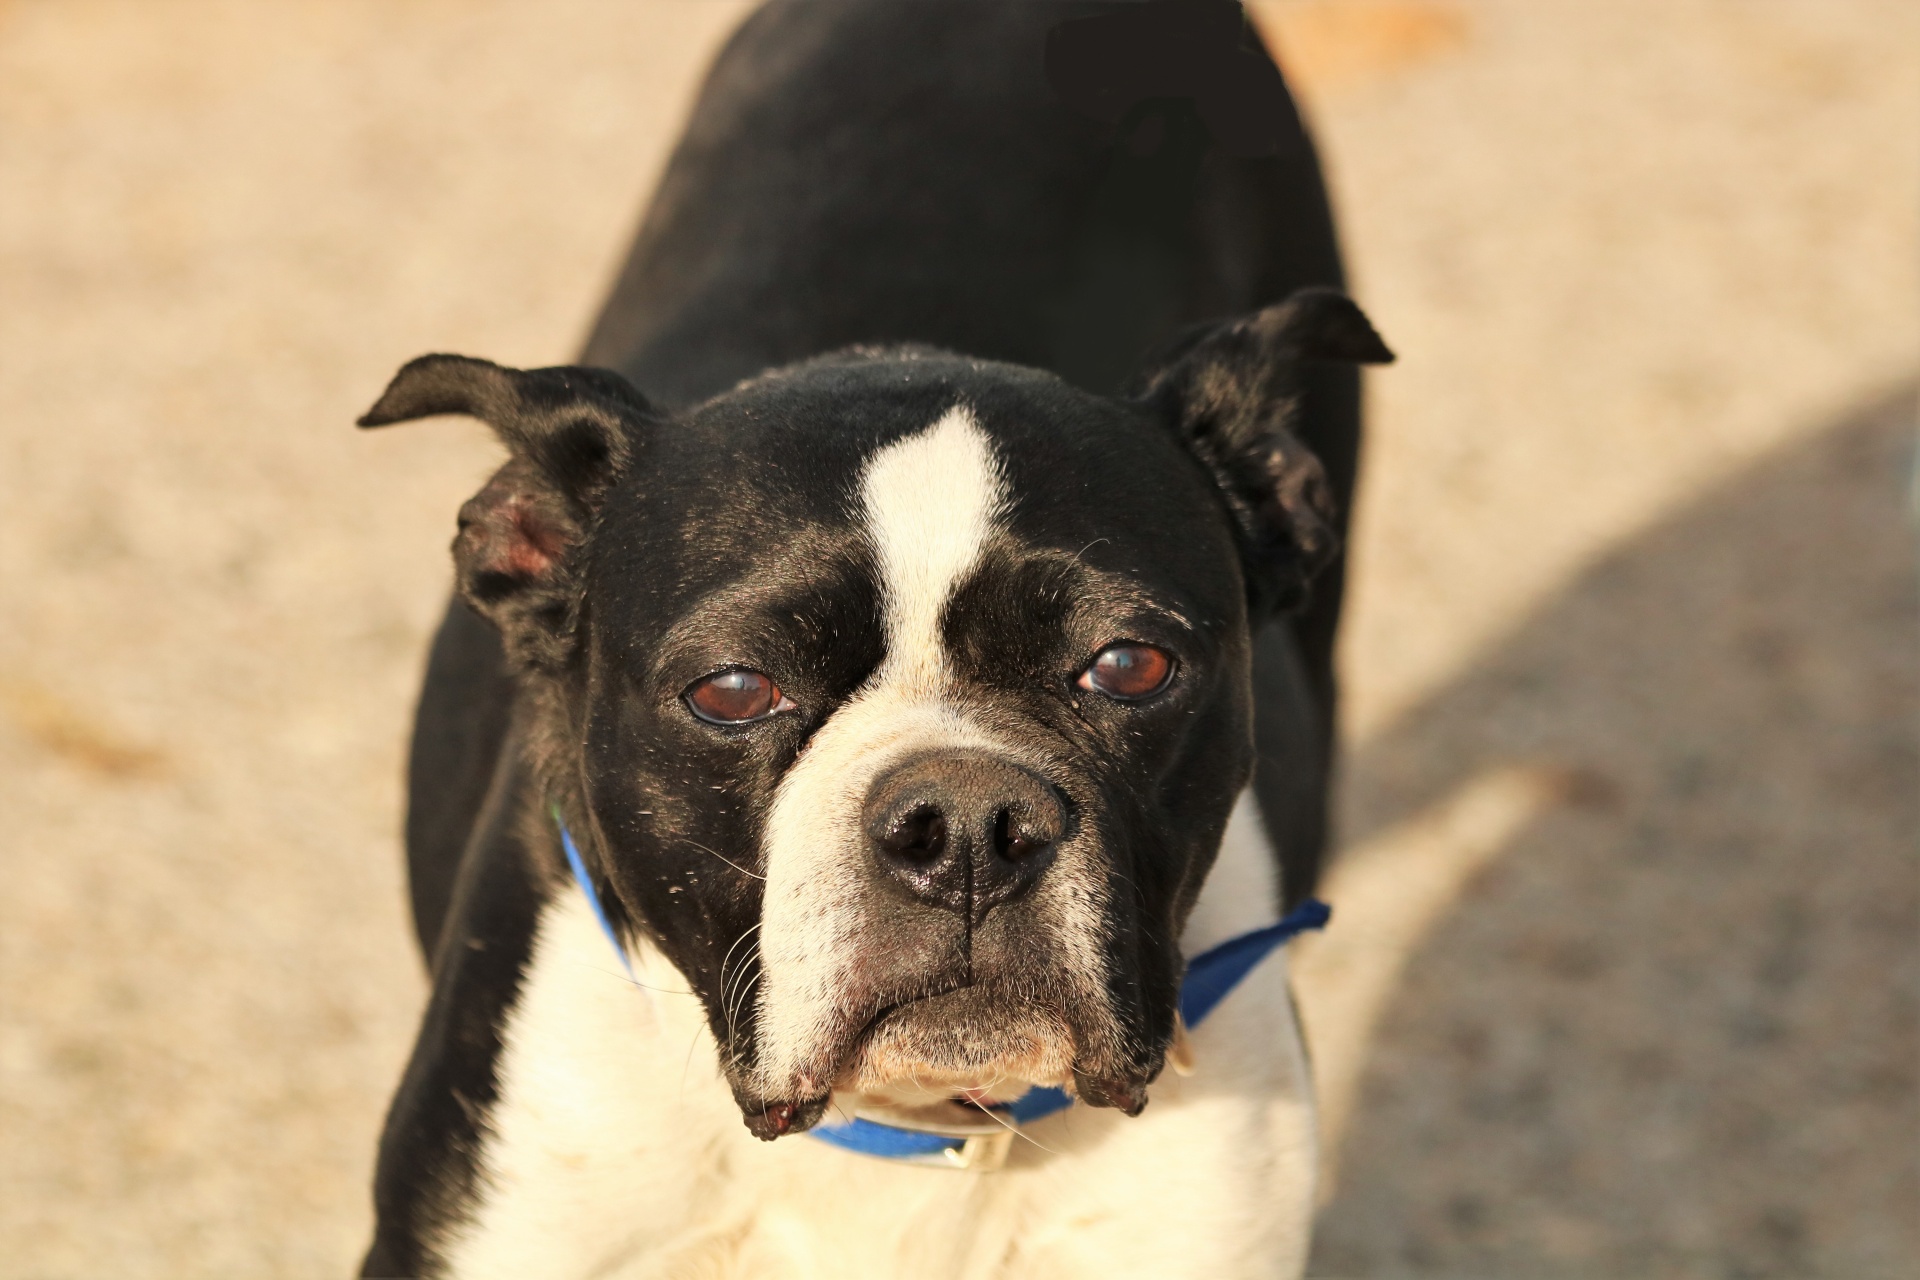 Close-up of the face of a Boston terrier dog, looking directly into the camera.